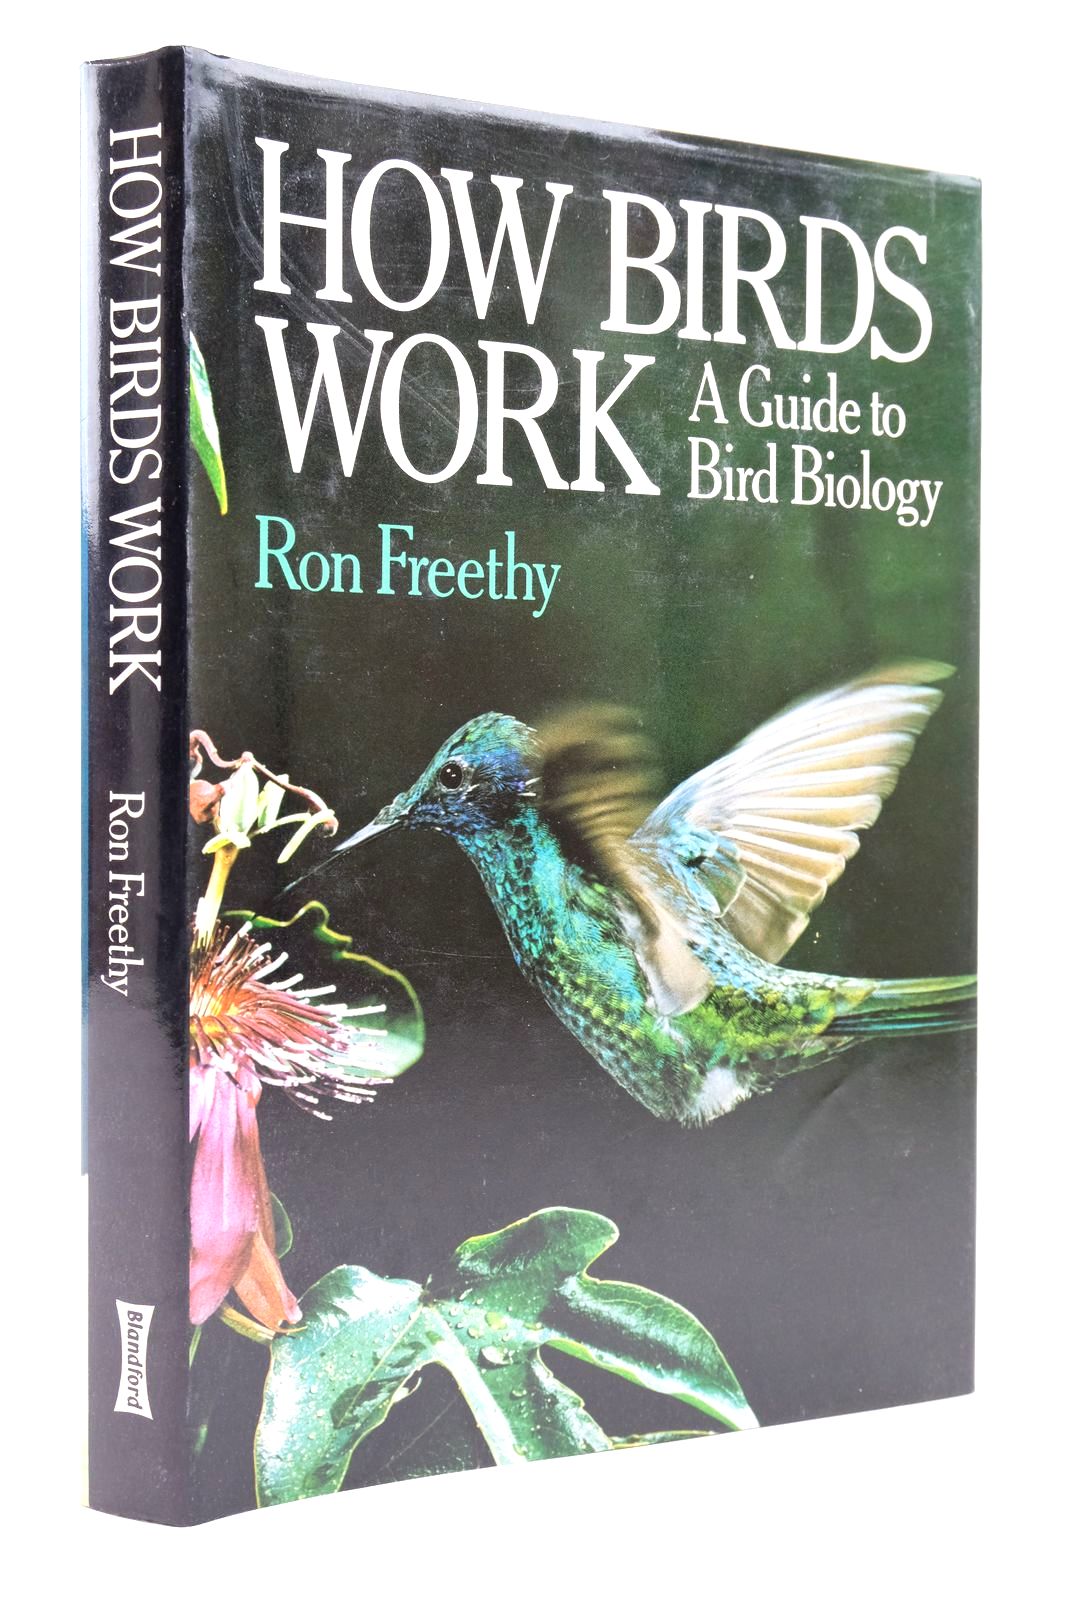 Photo of HOW BIRDS WORK written by Freethy, Ron published by Blandford Press (STOCK CODE: 2139127)  for sale by Stella & Rose's Books